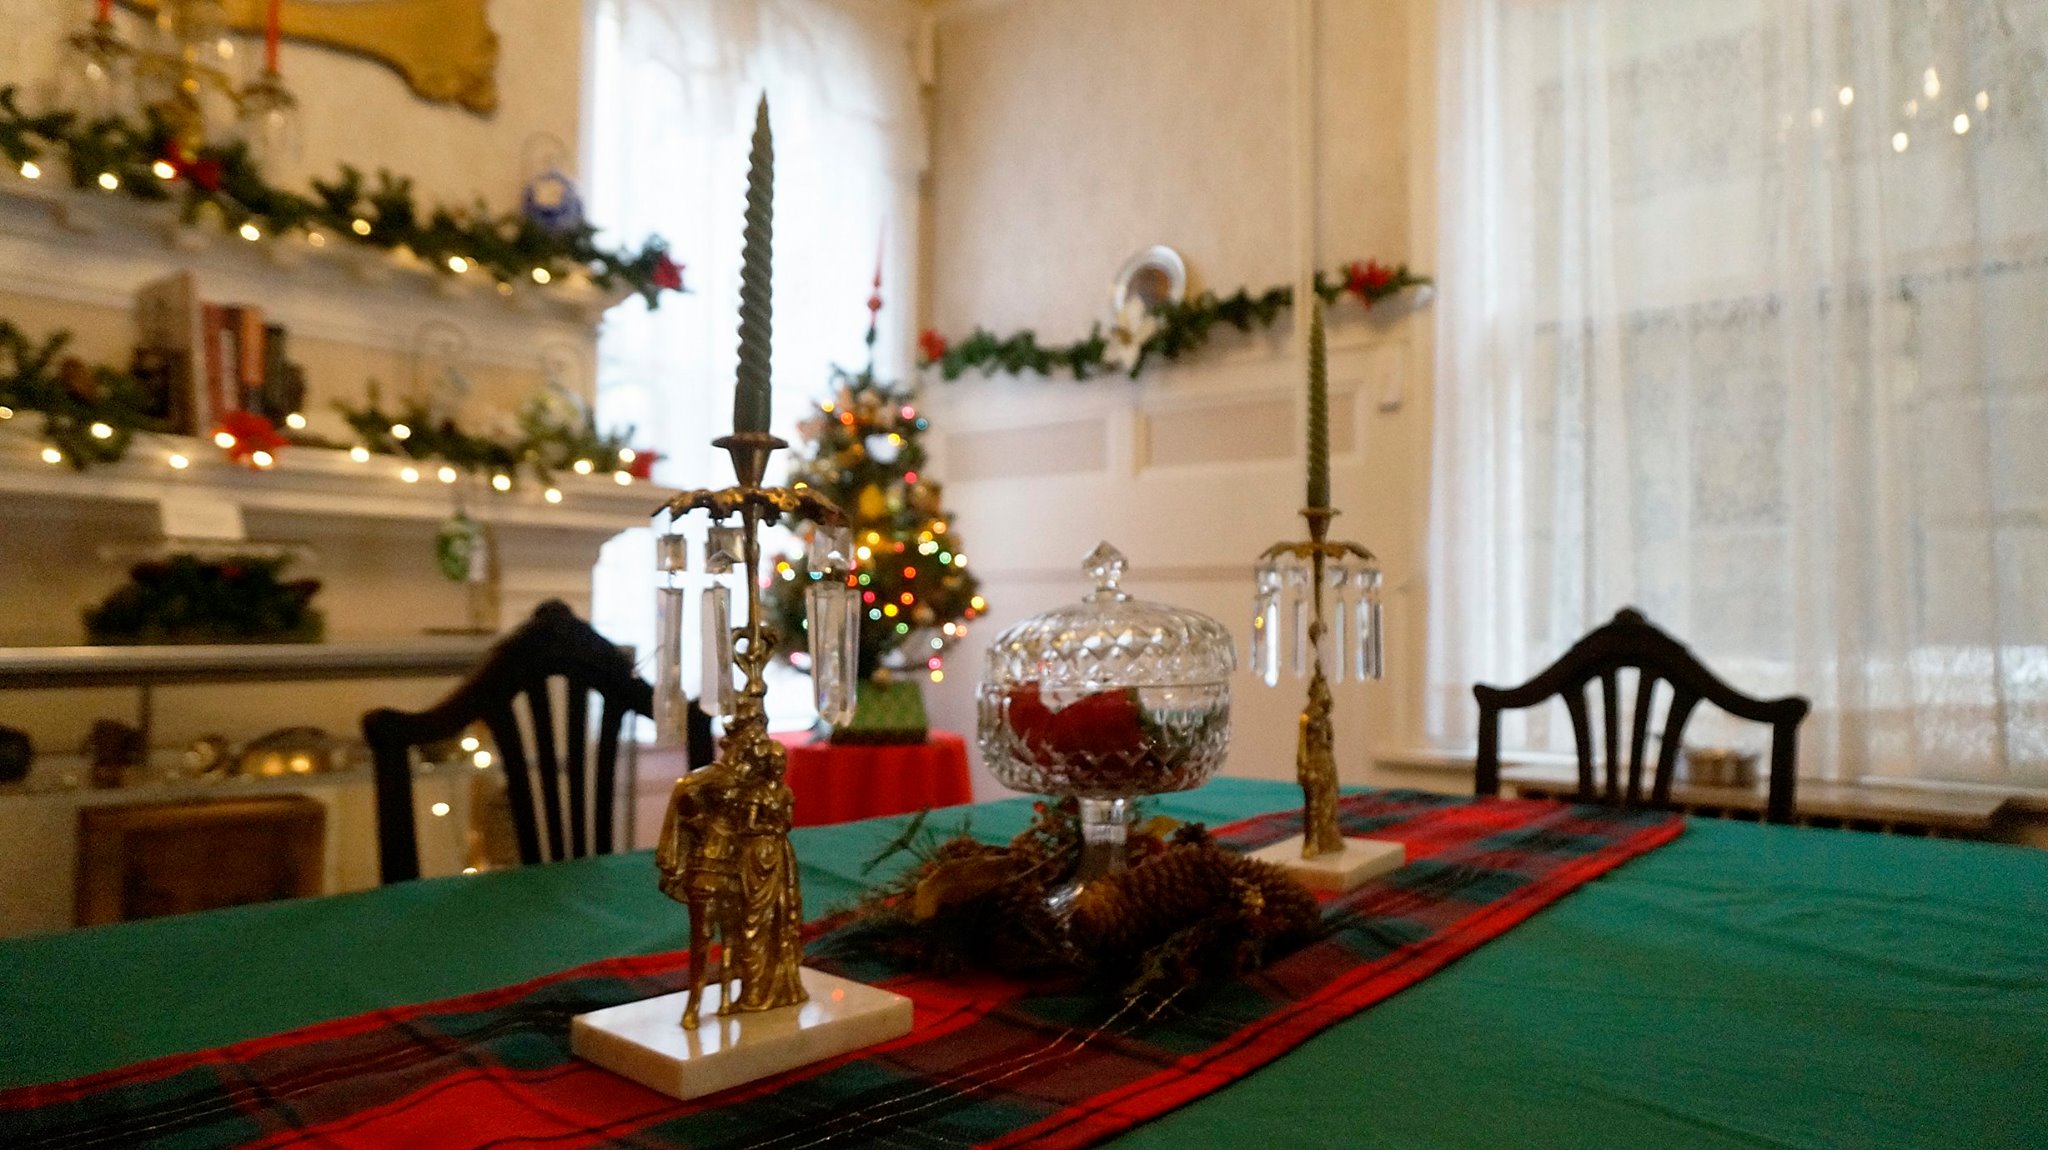 interior of museum decorated for Christmas